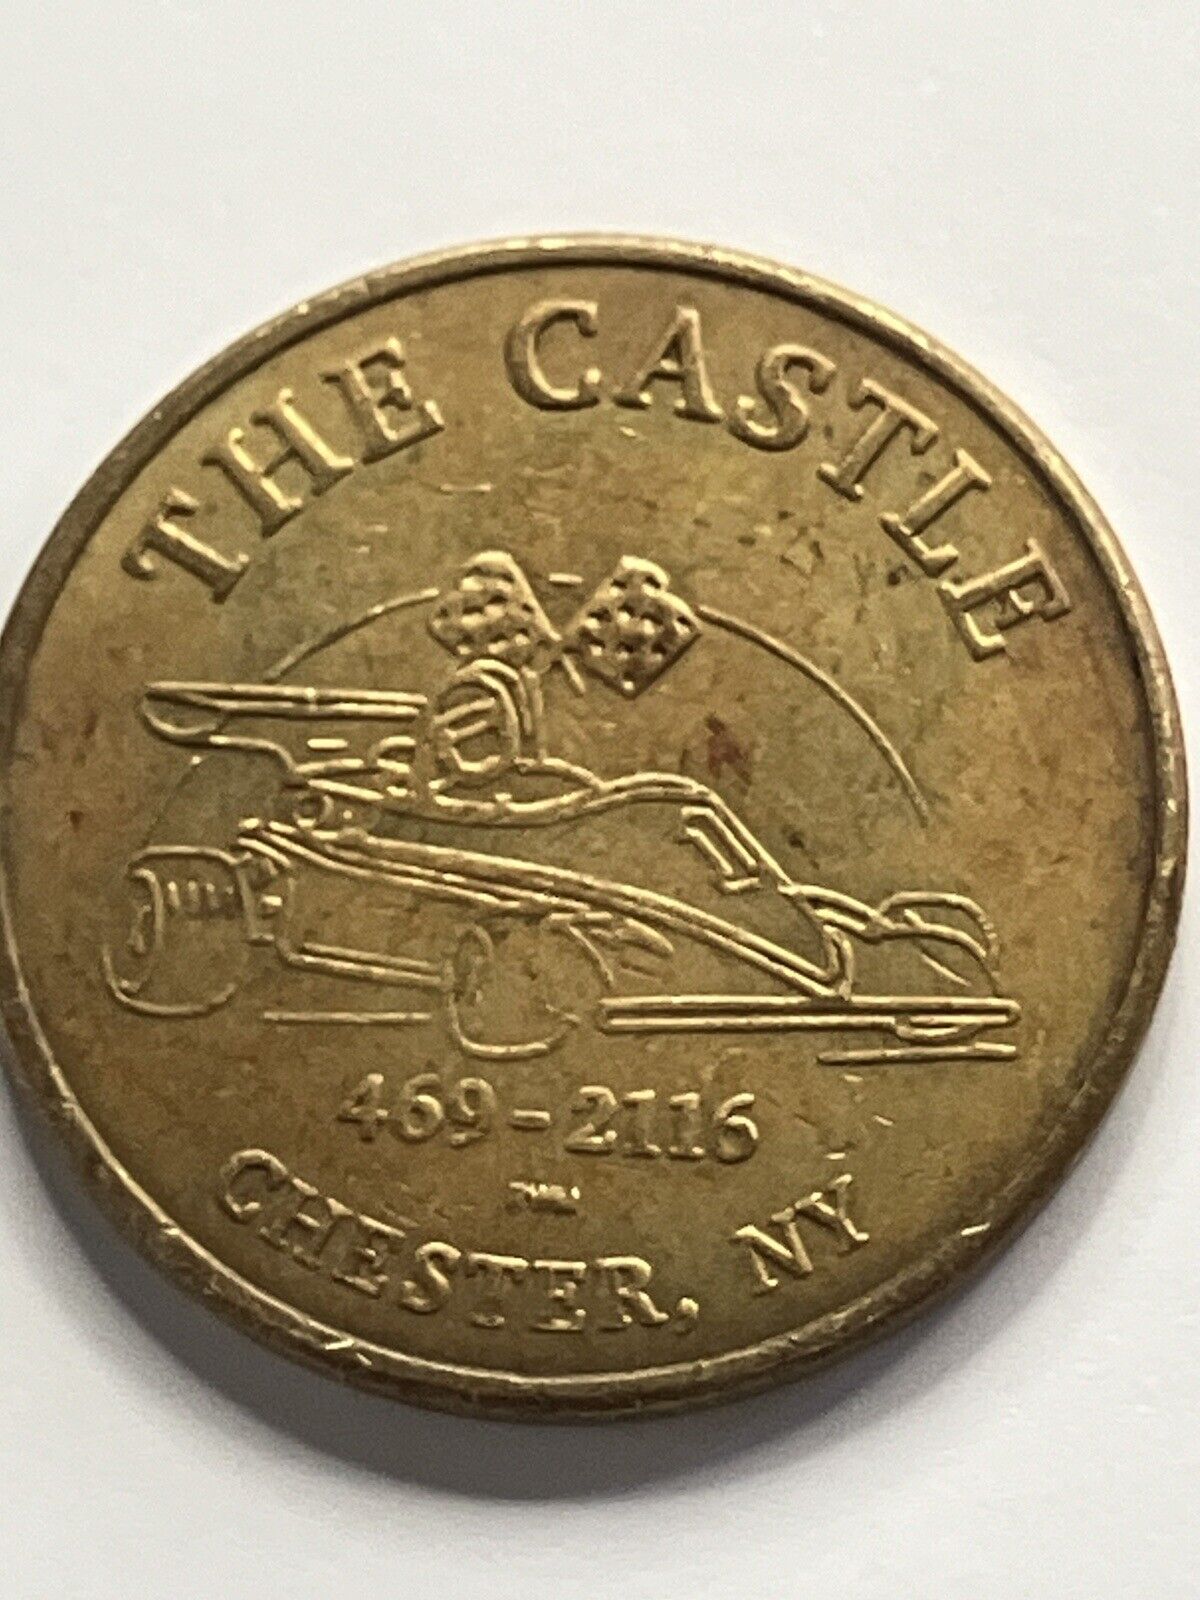 RARE OLD LARGE THE CASTLE FUN CENTER CHESTER NEW YORK ARCADE TOKEN OBSOLETE #st1